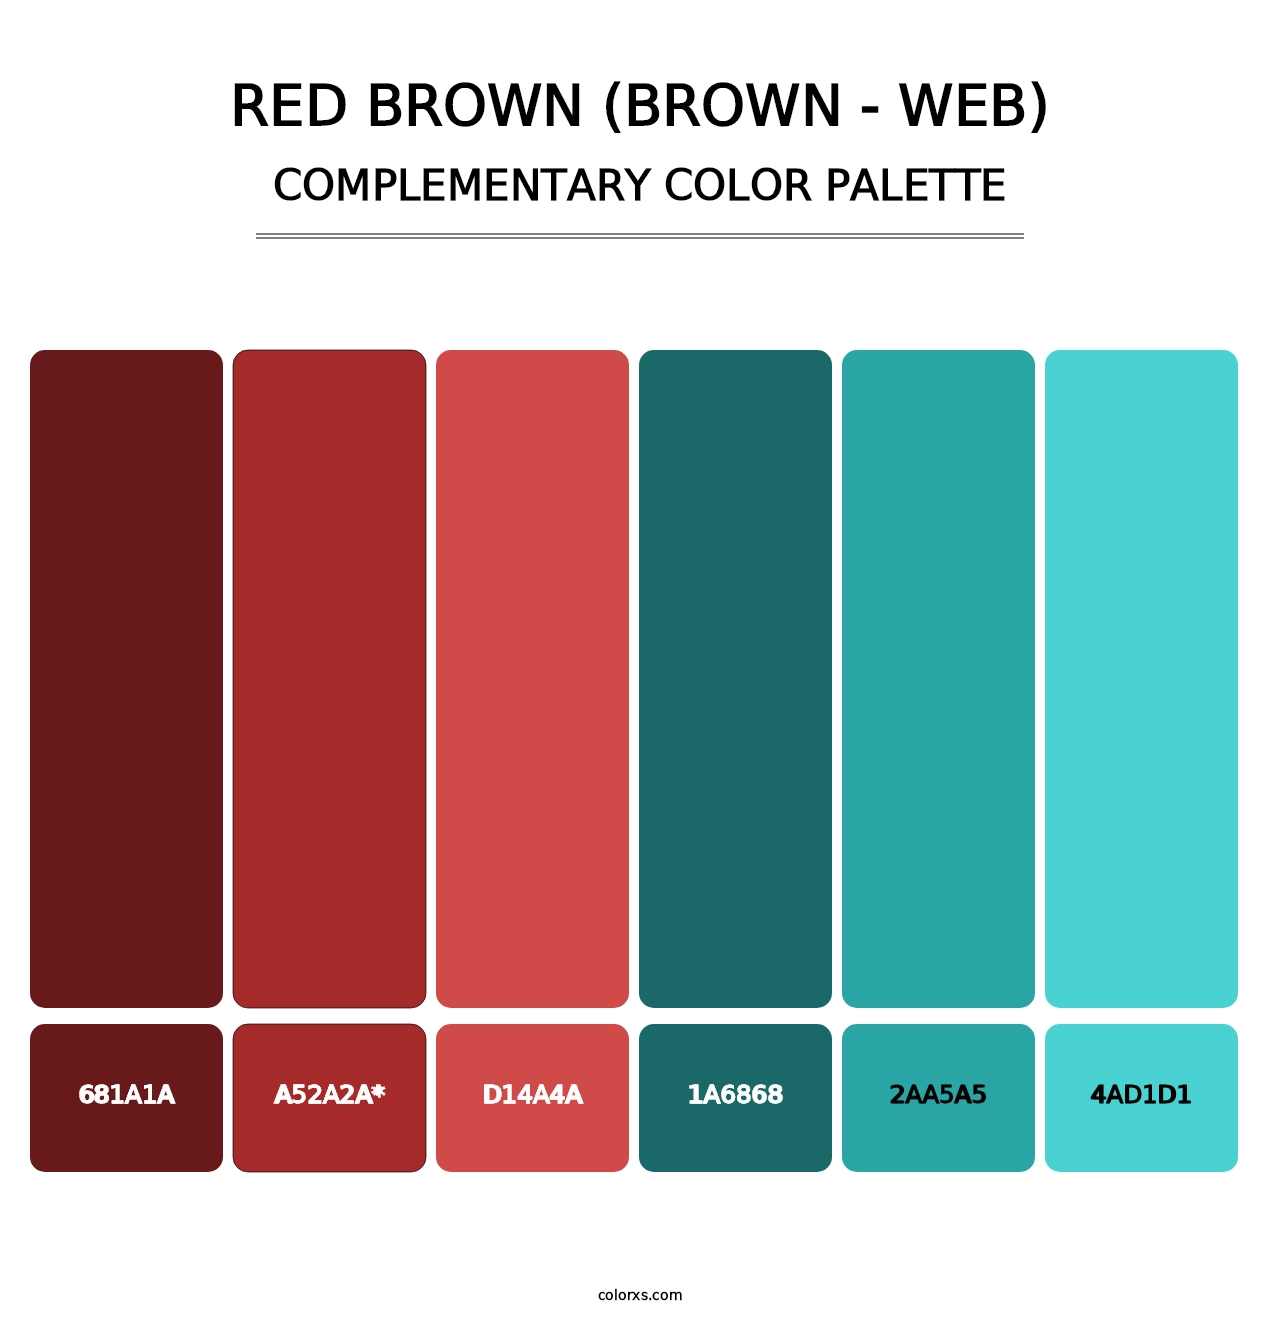 Red Brown (Brown - Web) - Complementary Color Palette